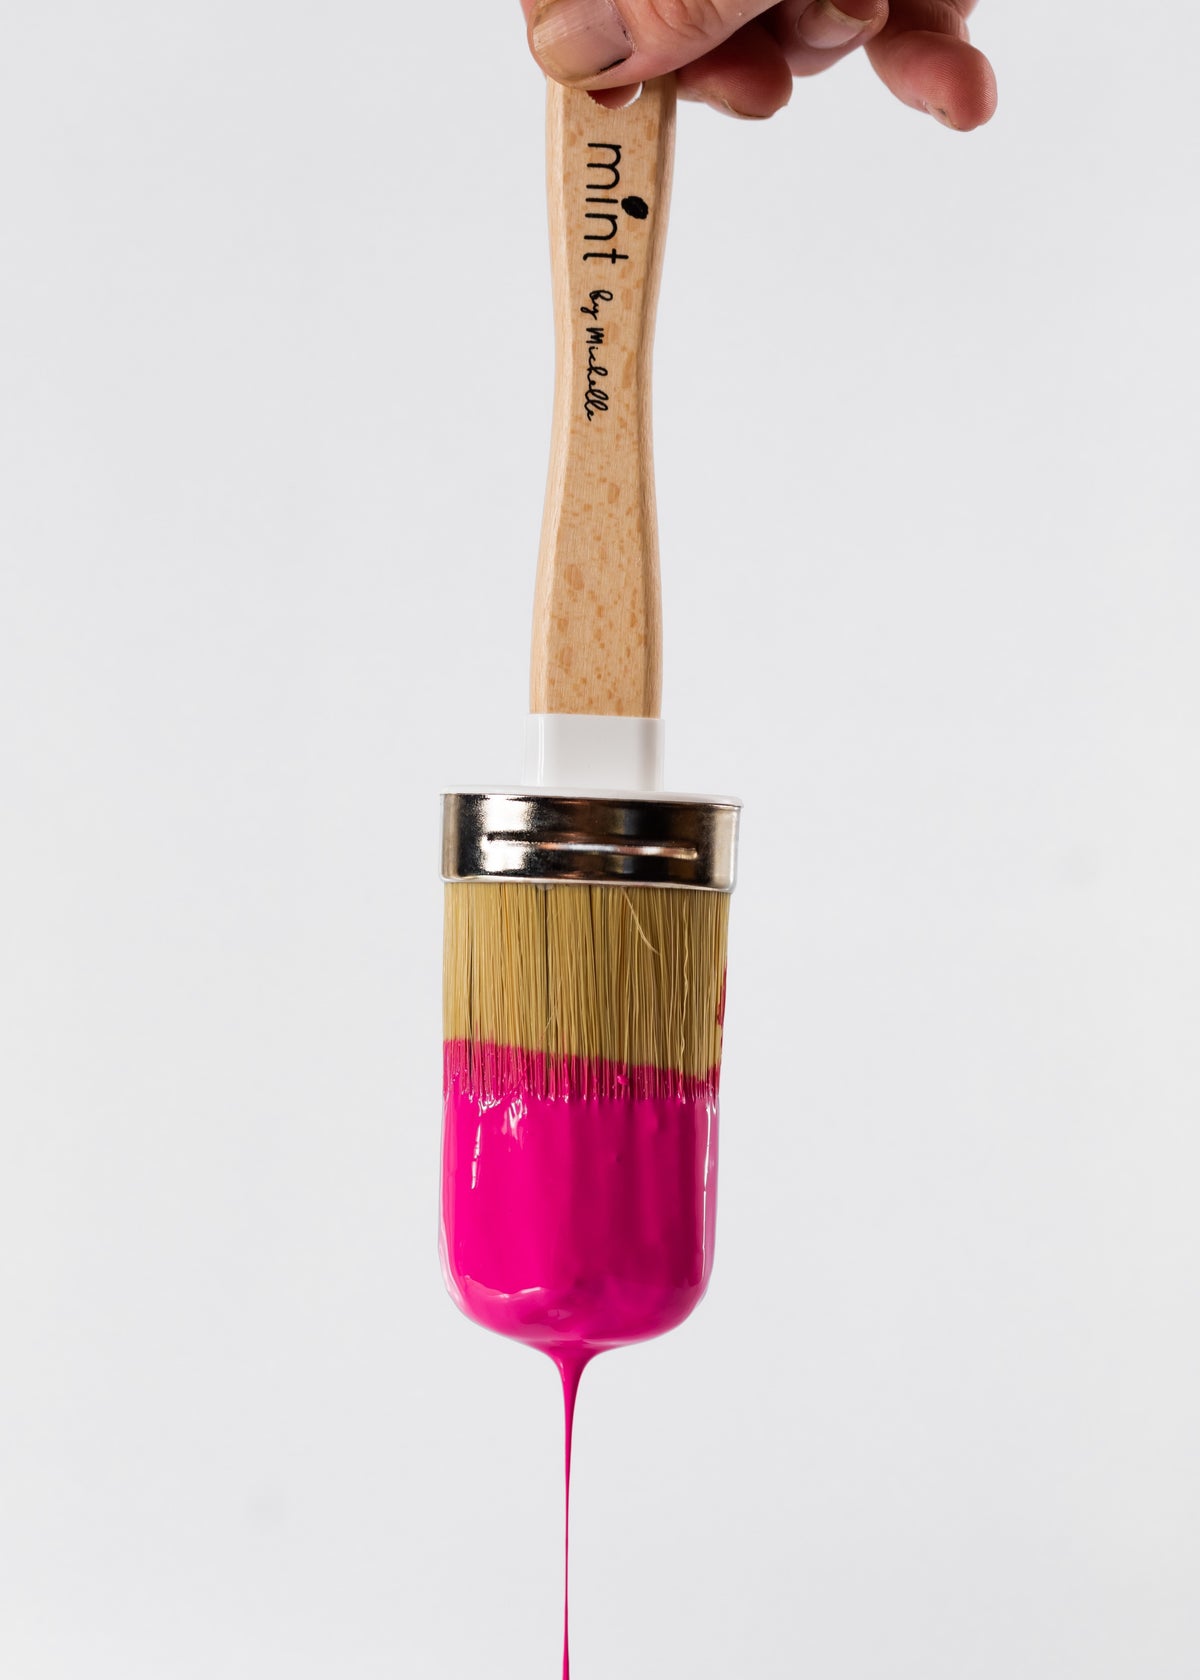 Premium Photo  New and used paintbrushes in a vase on a pink